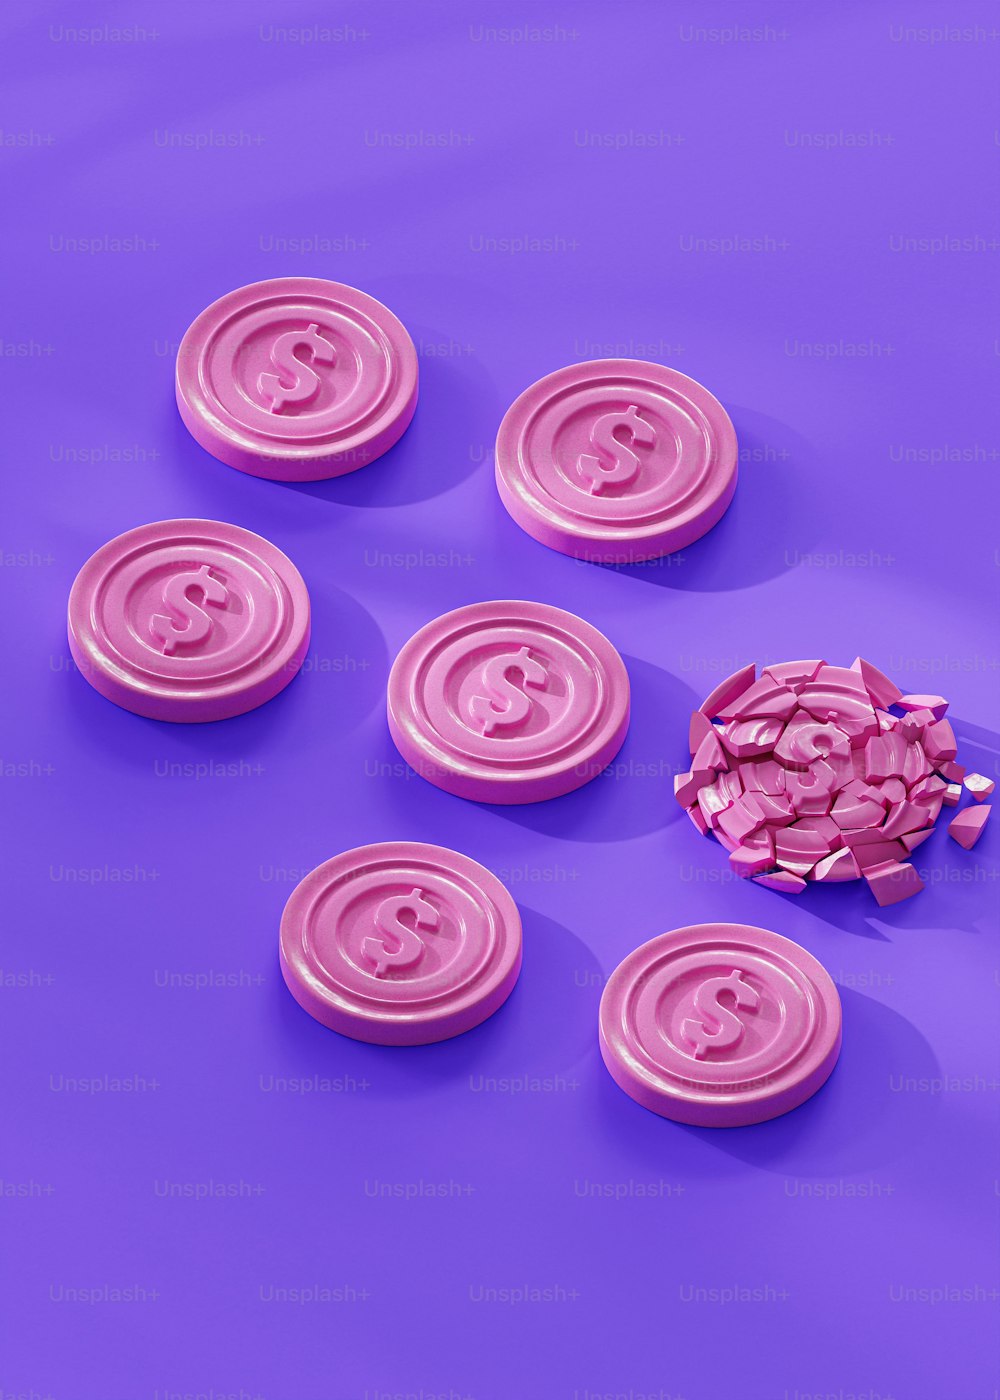 a group of pink buttons sitting on top of a purple surface